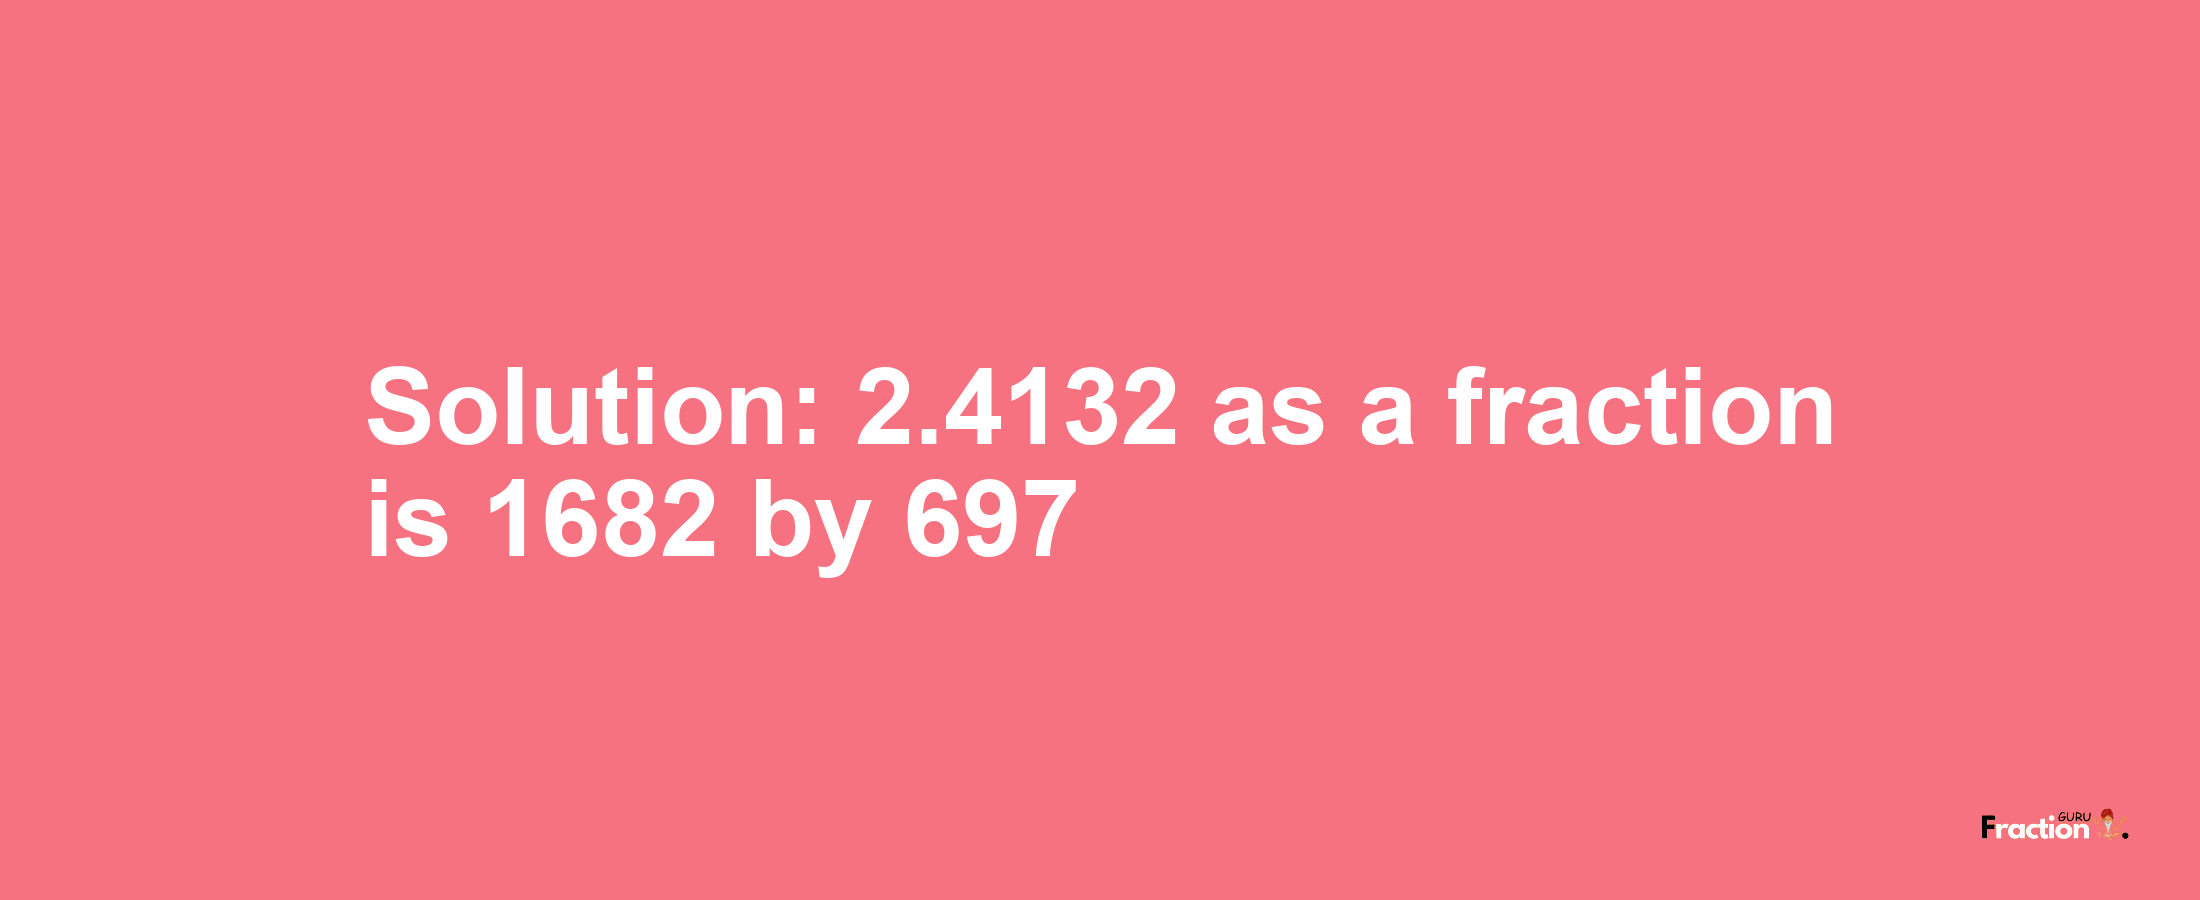 Solution:2.4132 as a fraction is 1682/697